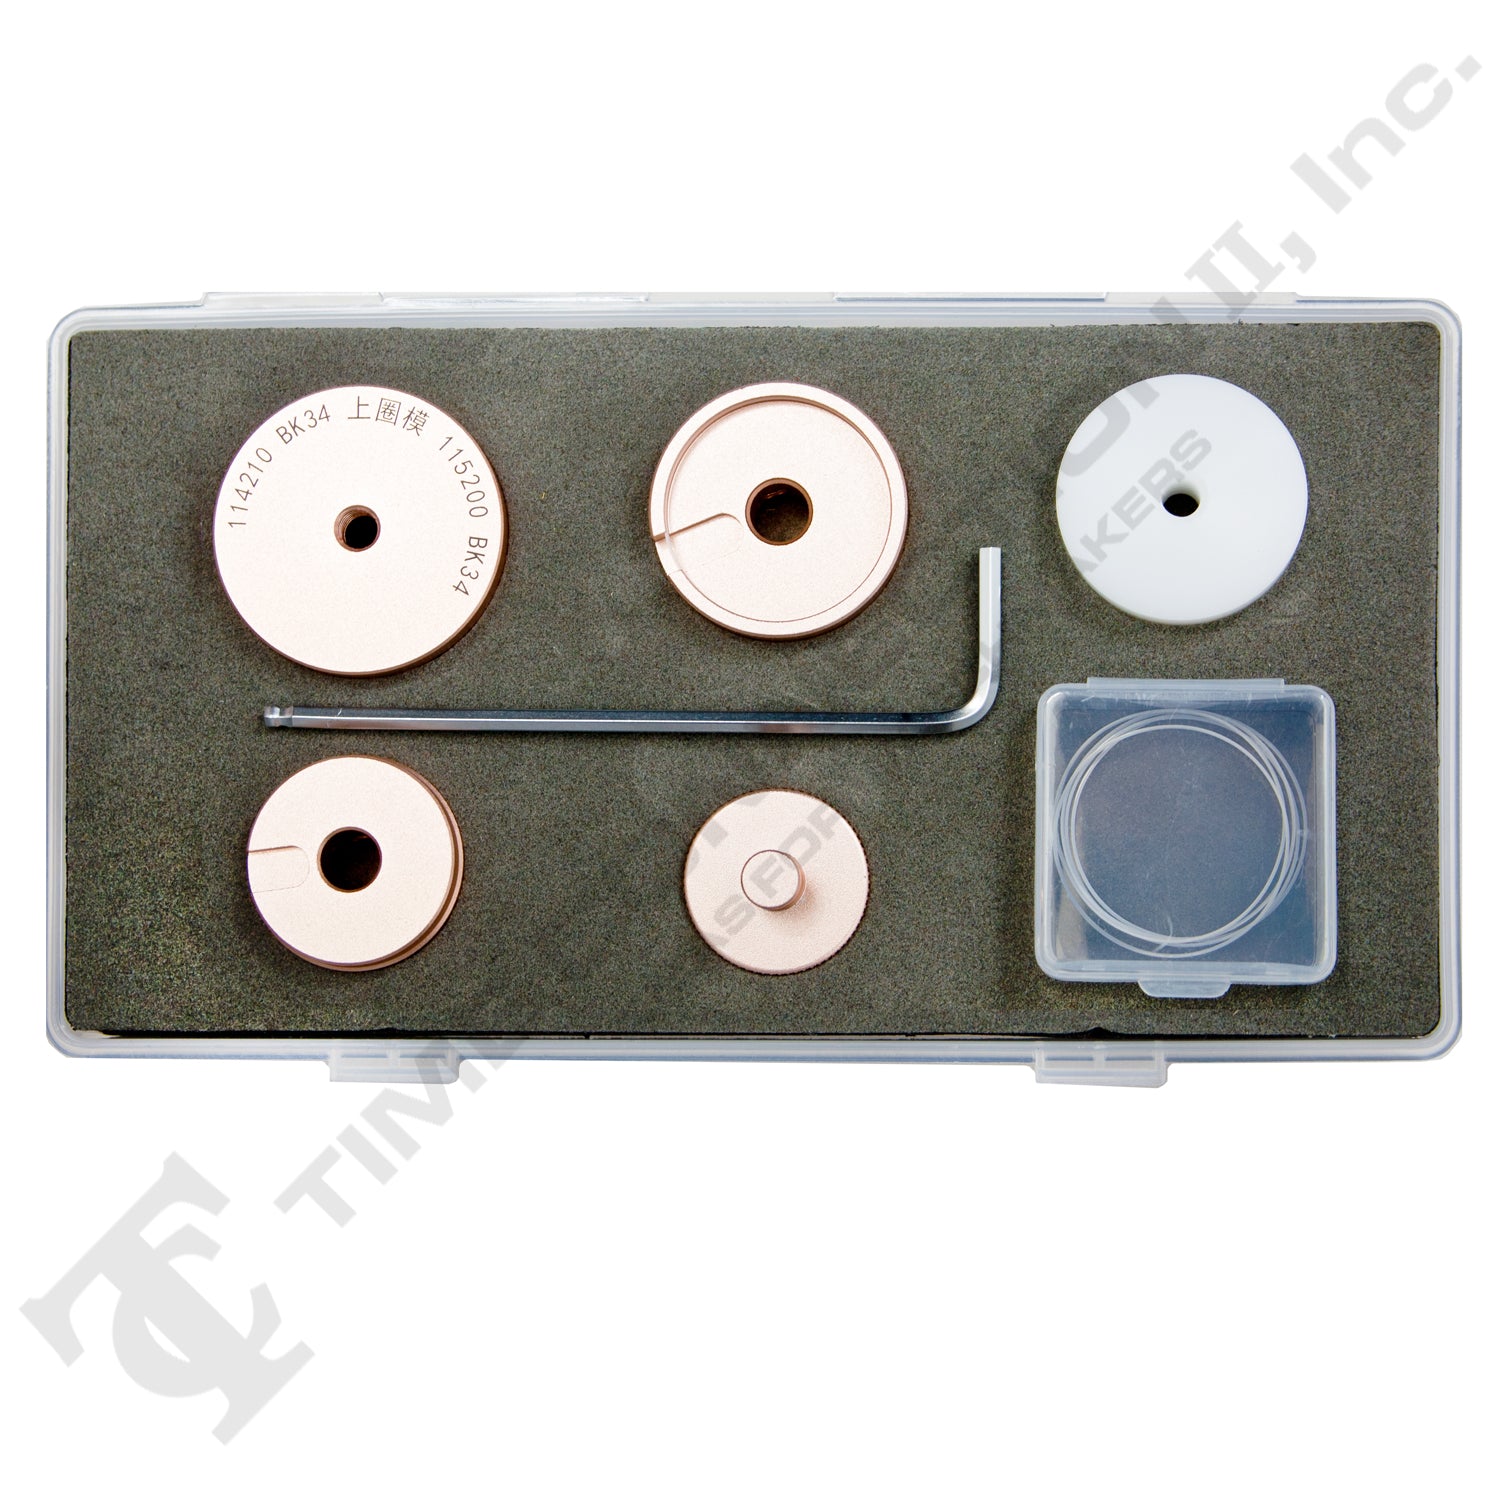 Dies Set to Fit Rolex Crystals and Gaskets for Model No. 114210, 115200